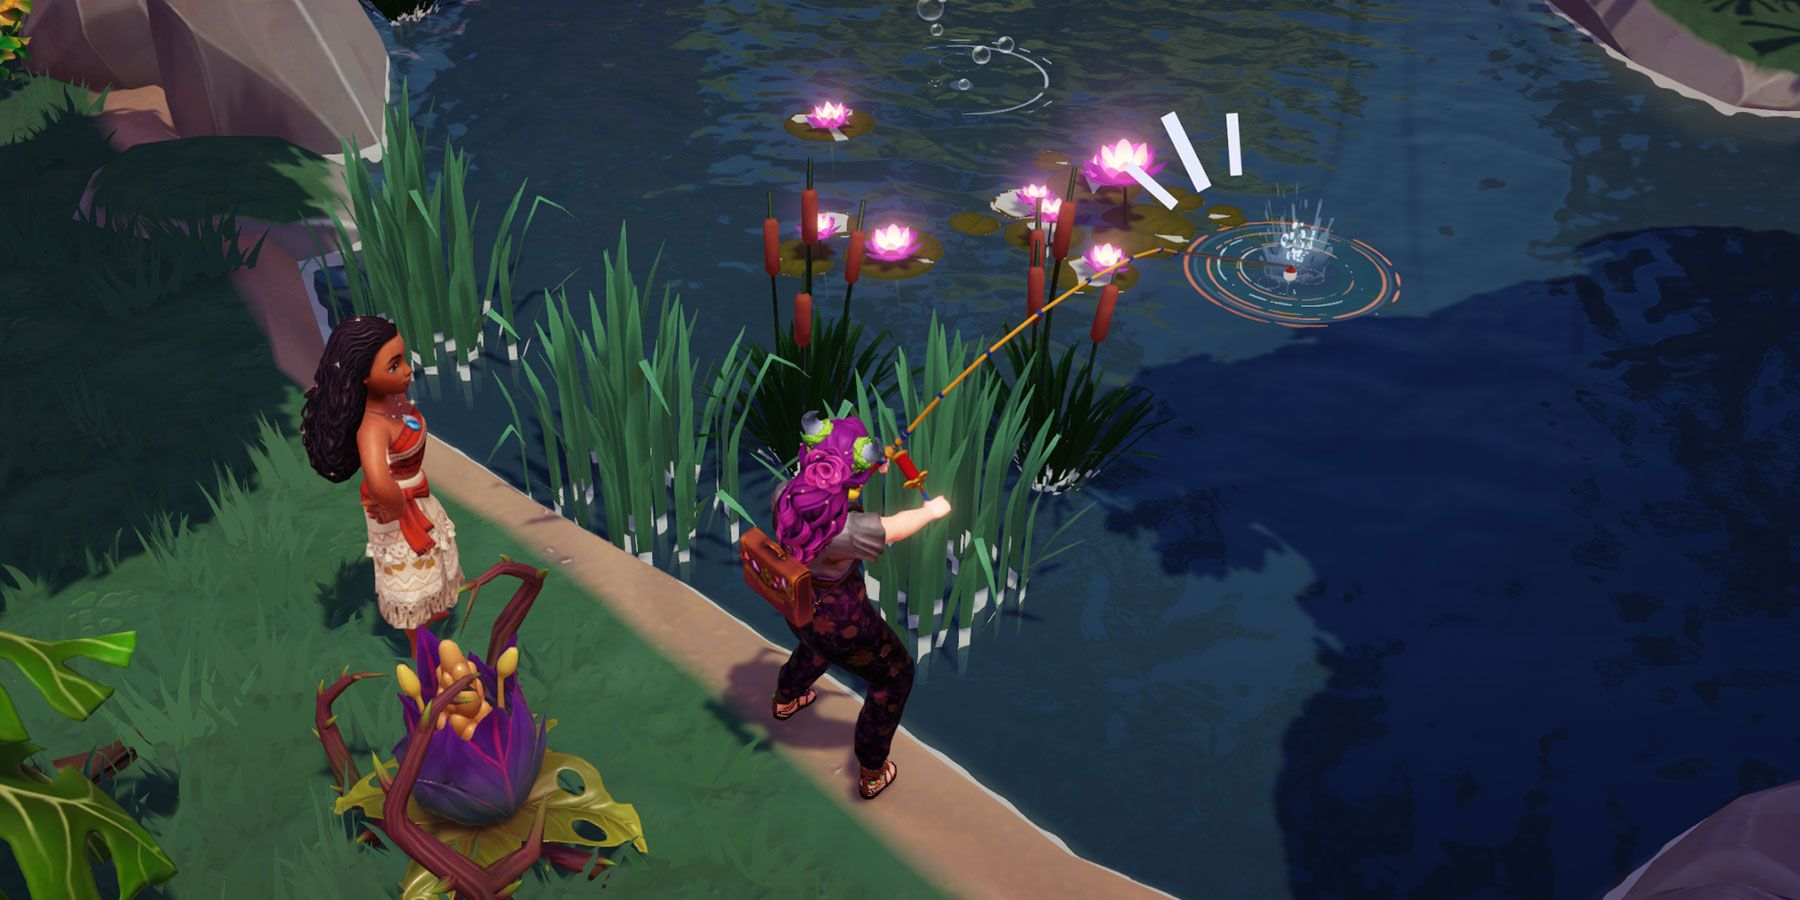 Fishing in the Wild Tangle in Disney Dreamlight Valley.